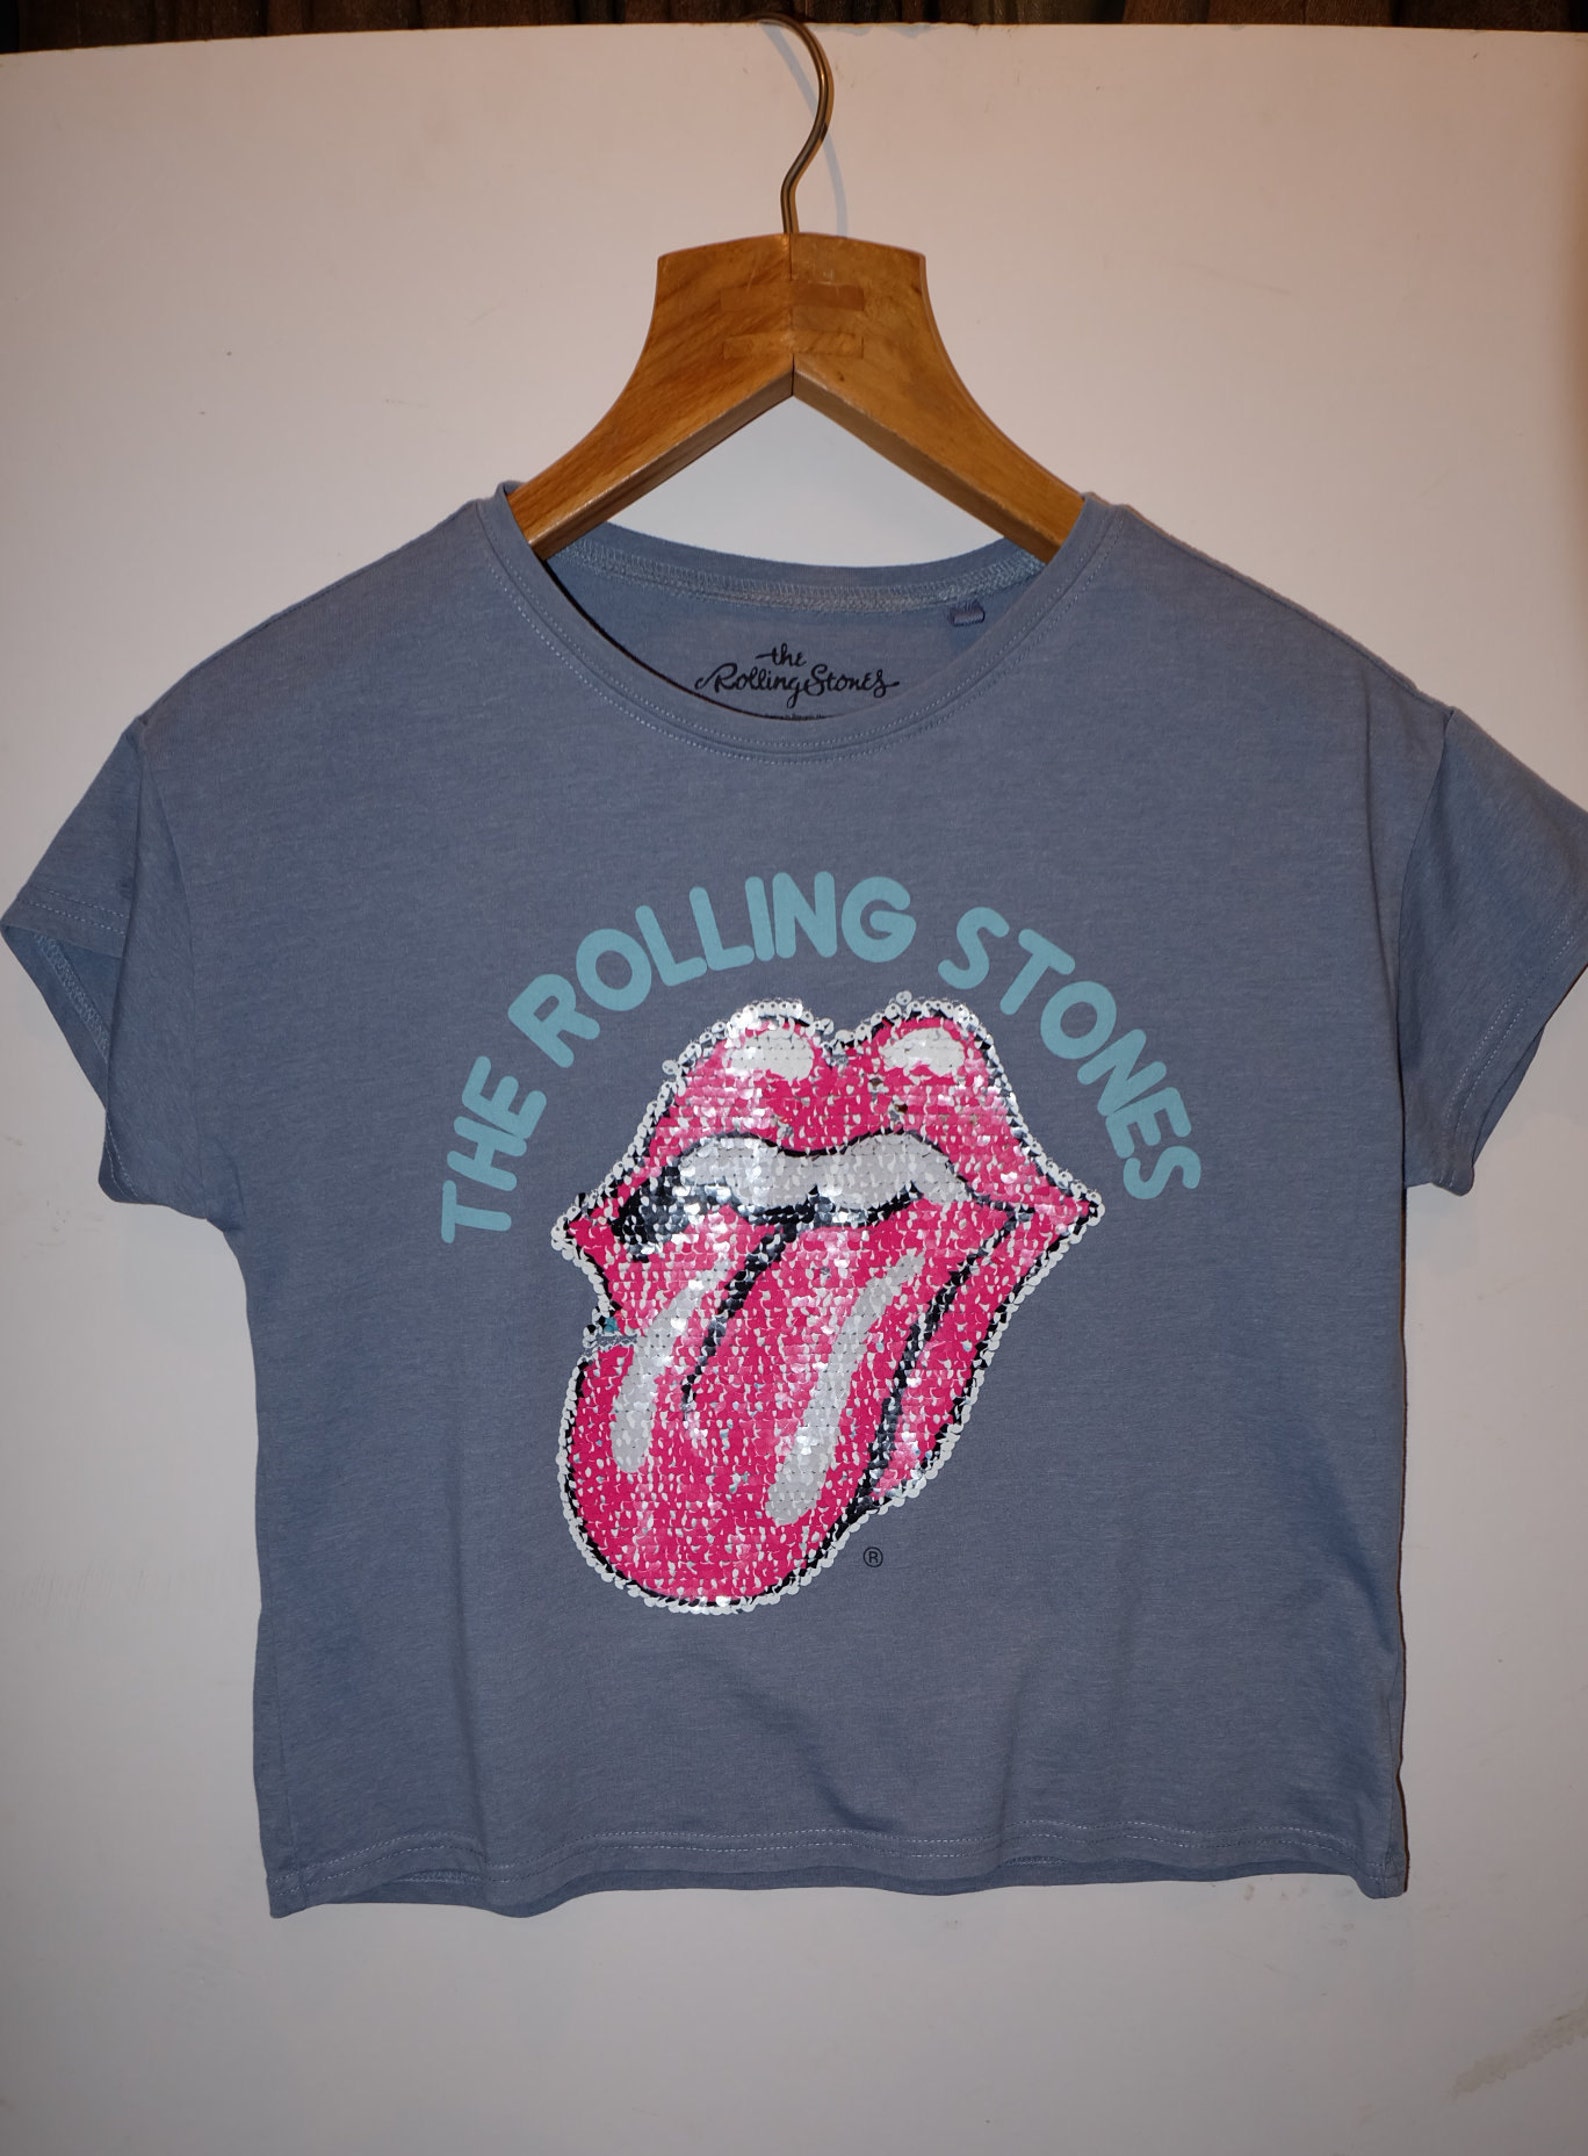 The Rolling Stones Sequins Vintage T-shirt | Etsy